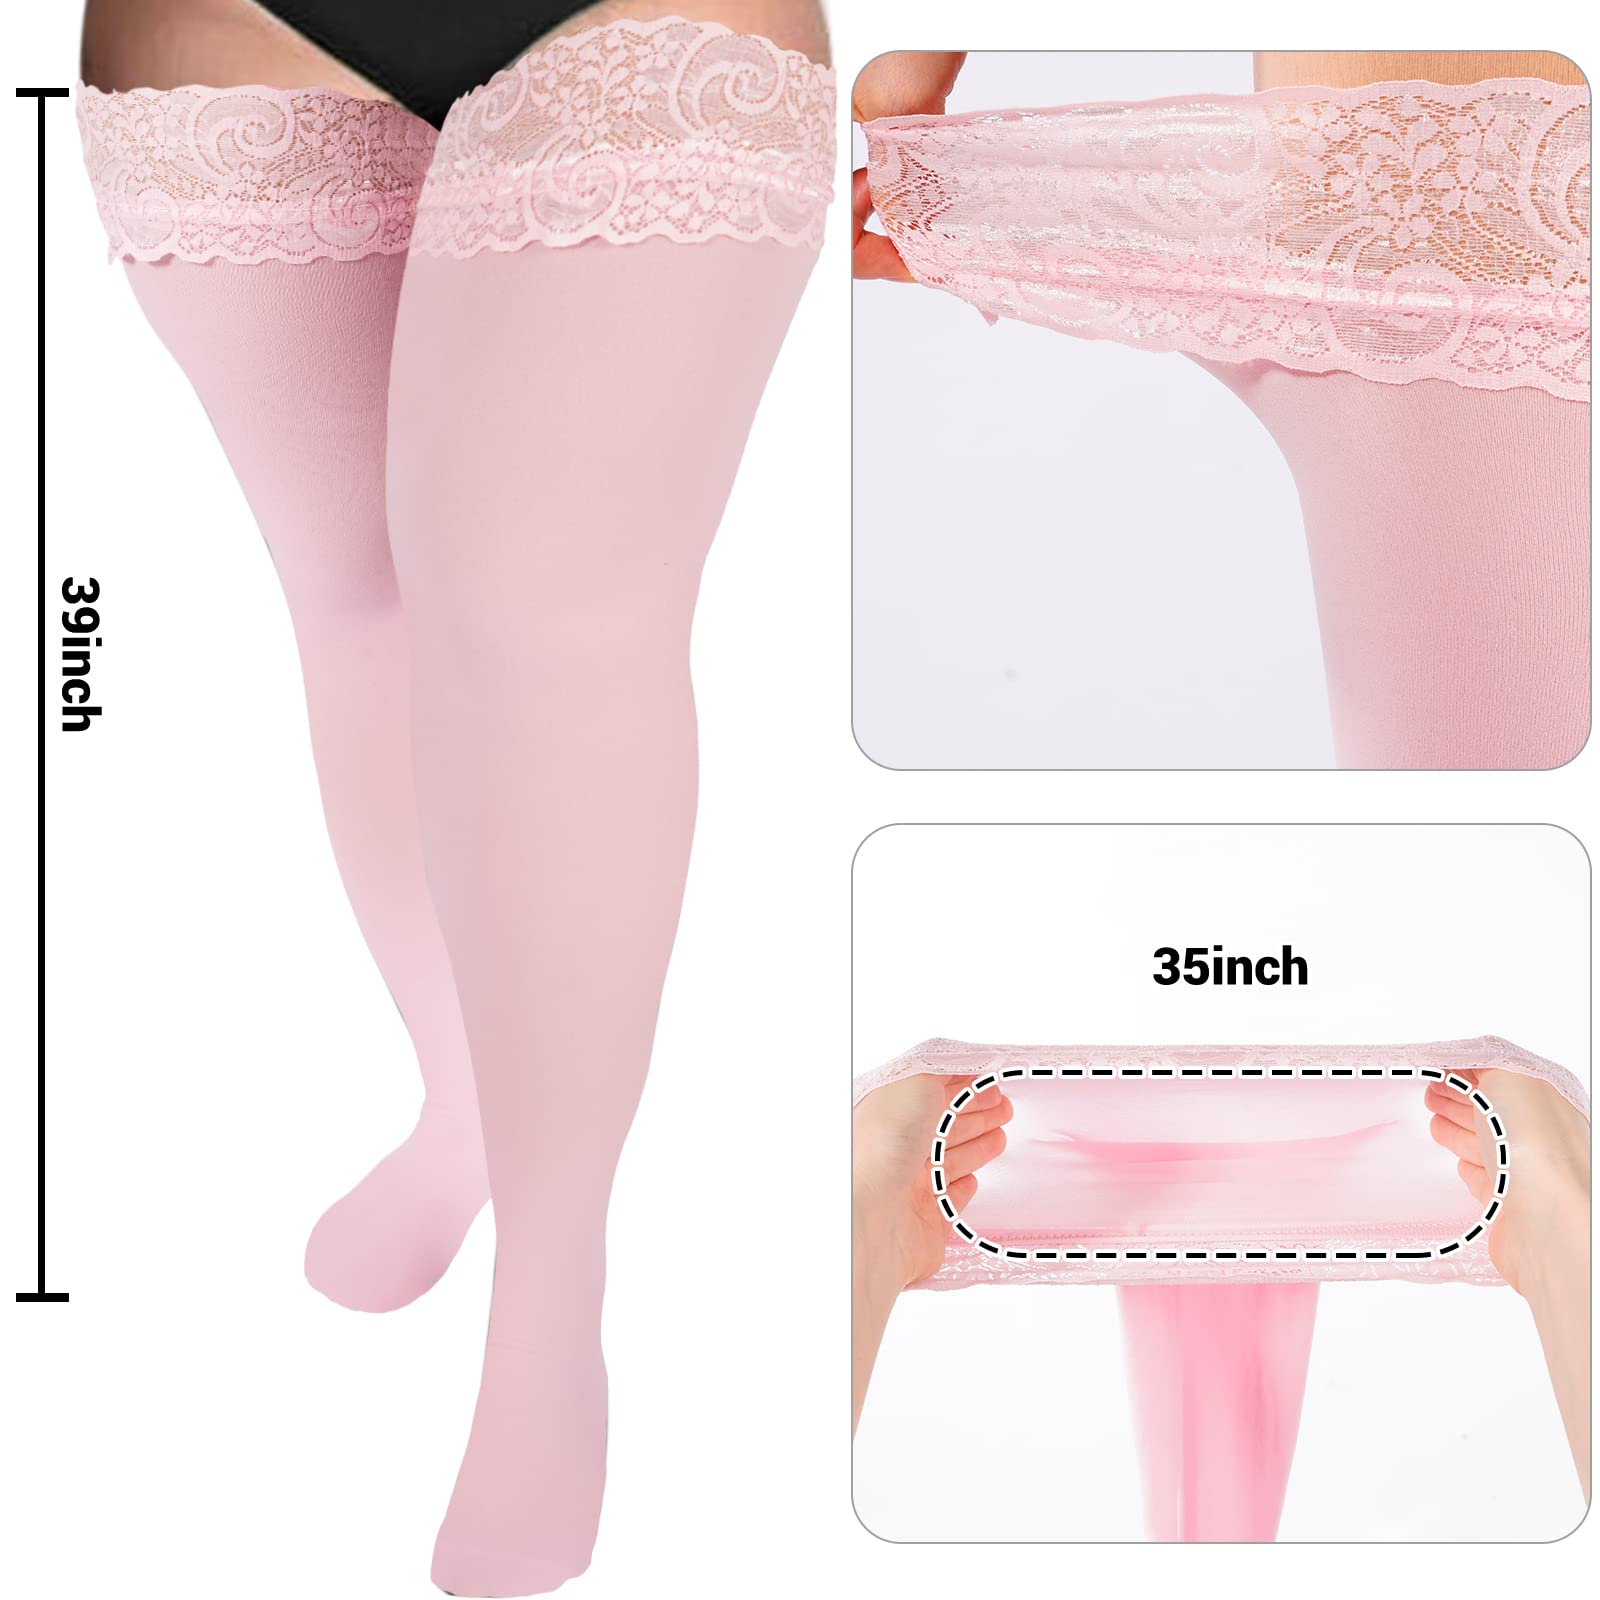  Winnerlion Lace Top Thigh High Stocking Sheer Stay Up Pantyhose  Lace Stay Up Hosiery Tights Nylon Pantyhose for Women (Pink, 80cm) :  Clothing, Shoes & Jewelry